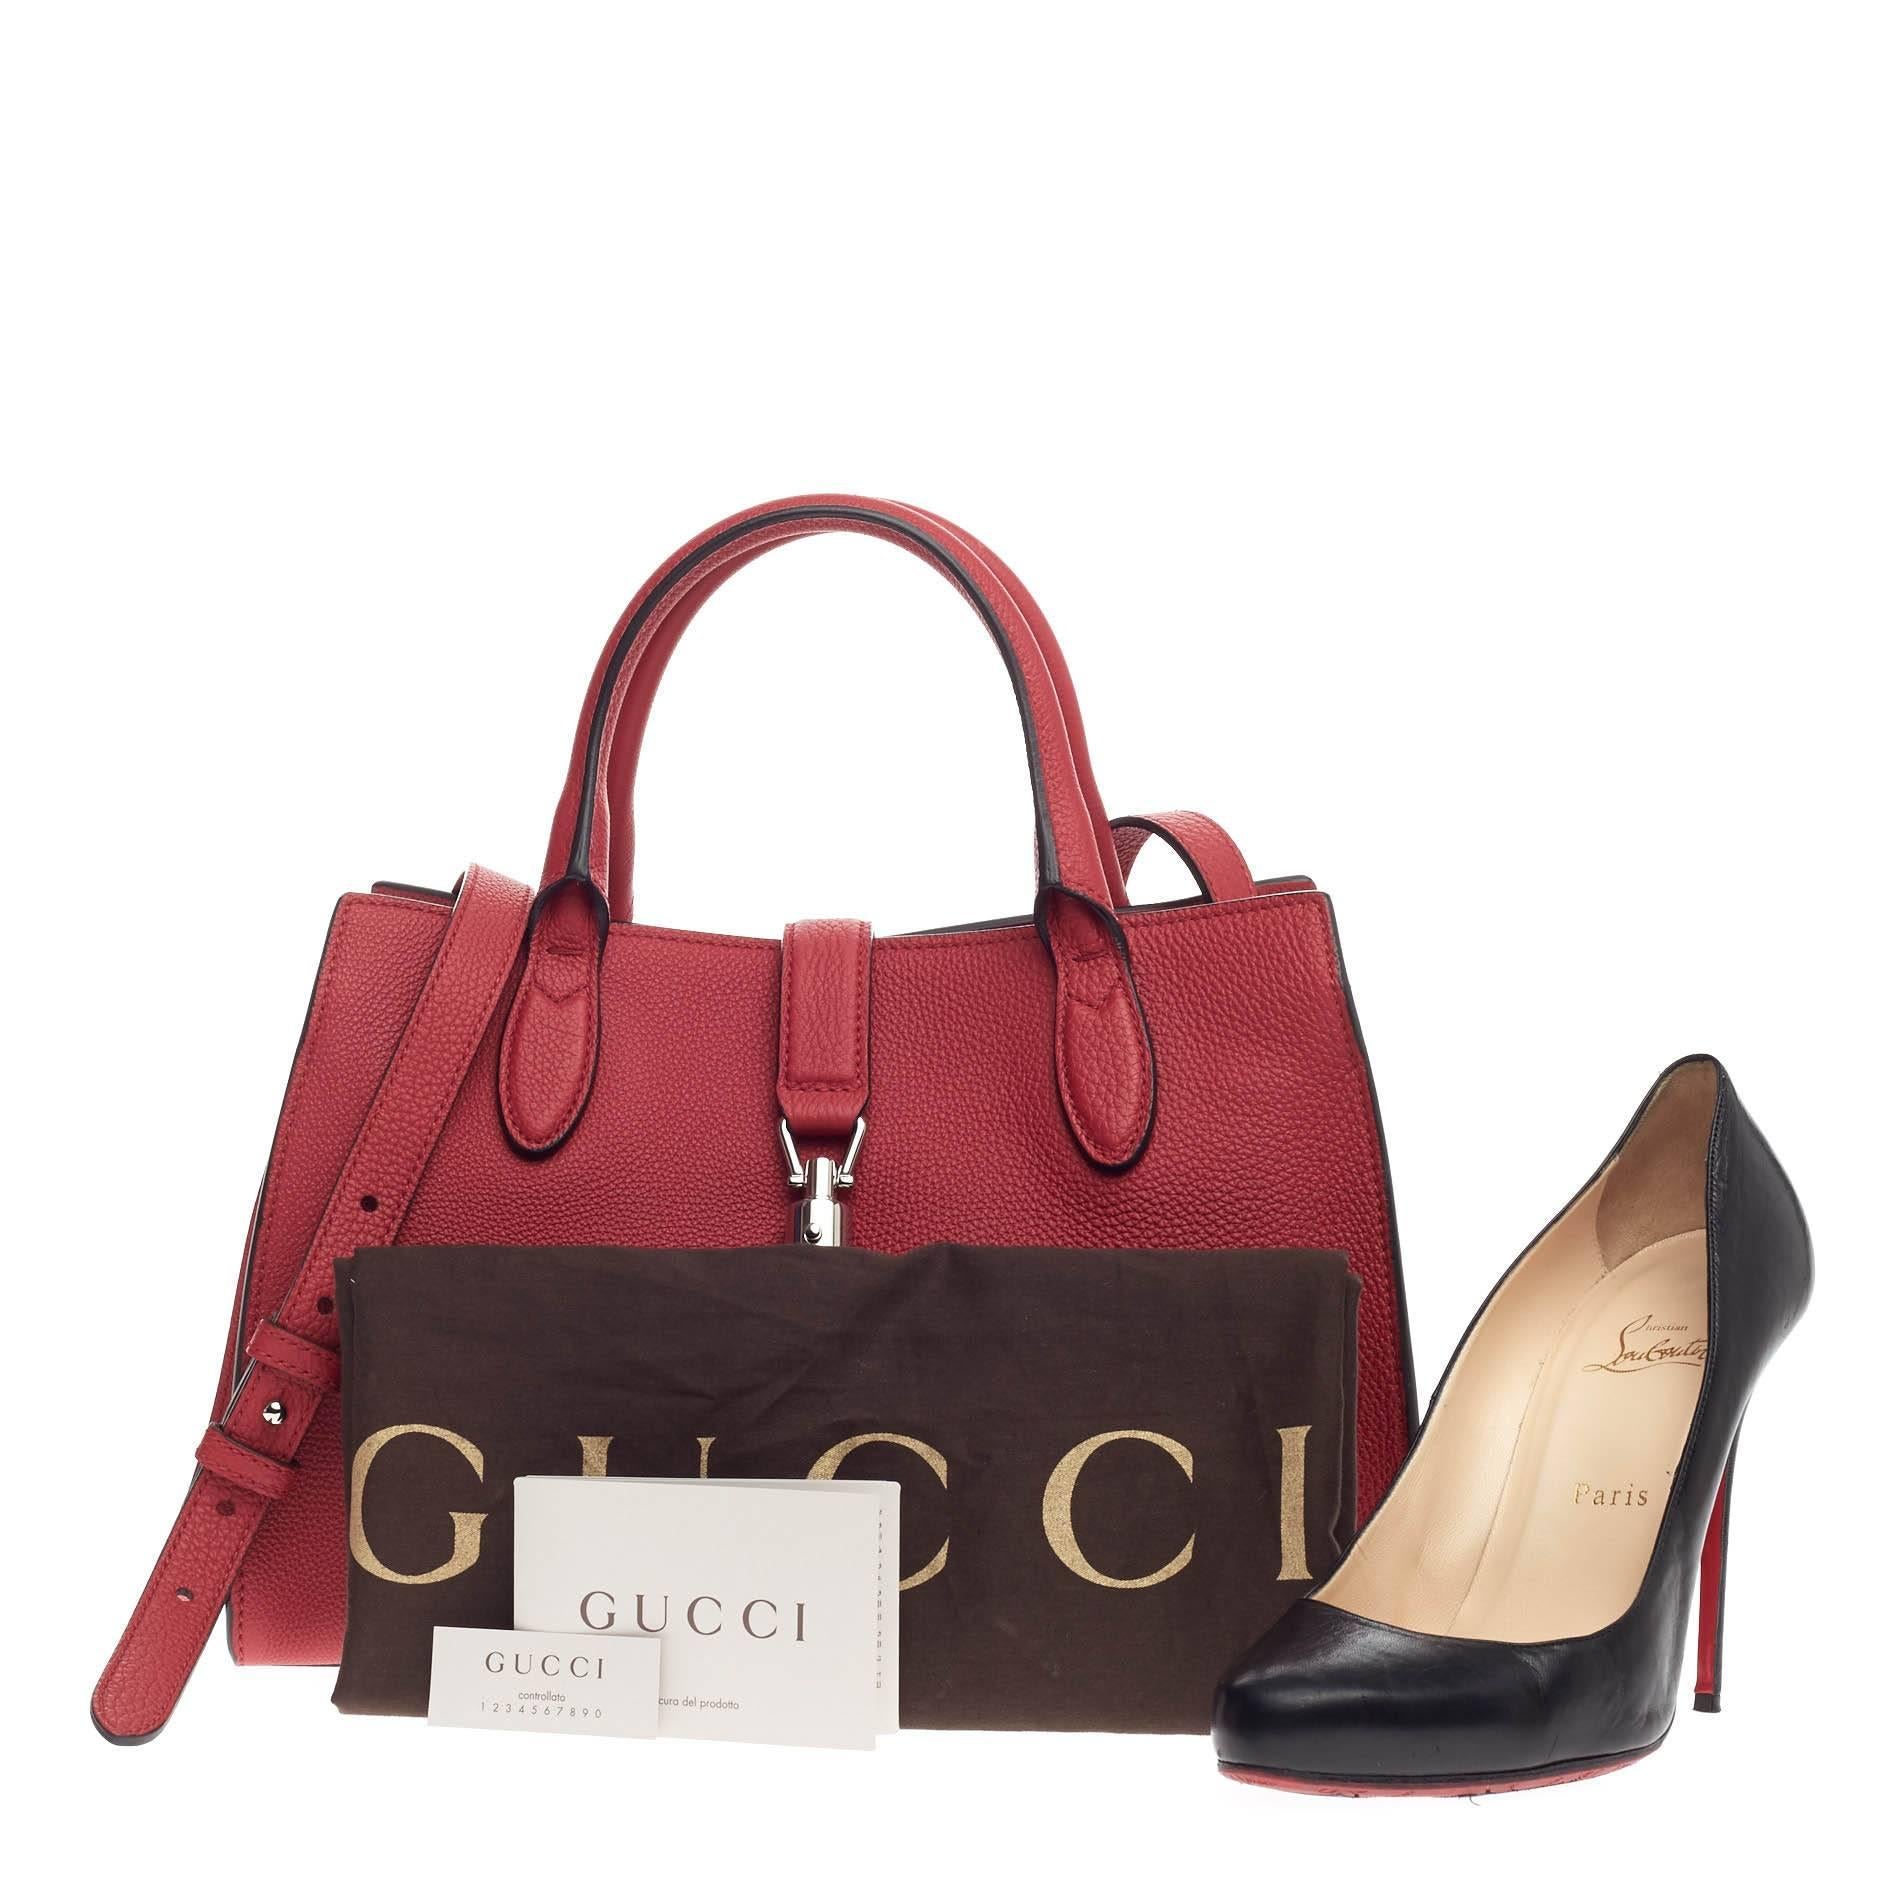 This authentic Gucci Jackie Soft Tote Leather Small is a must-have tote fit for the modern woman. Constructed from classic red pebbled leather, this iconic, minimalist take on the iconic Jackie features a soft-structured silhouette, dual-rolled